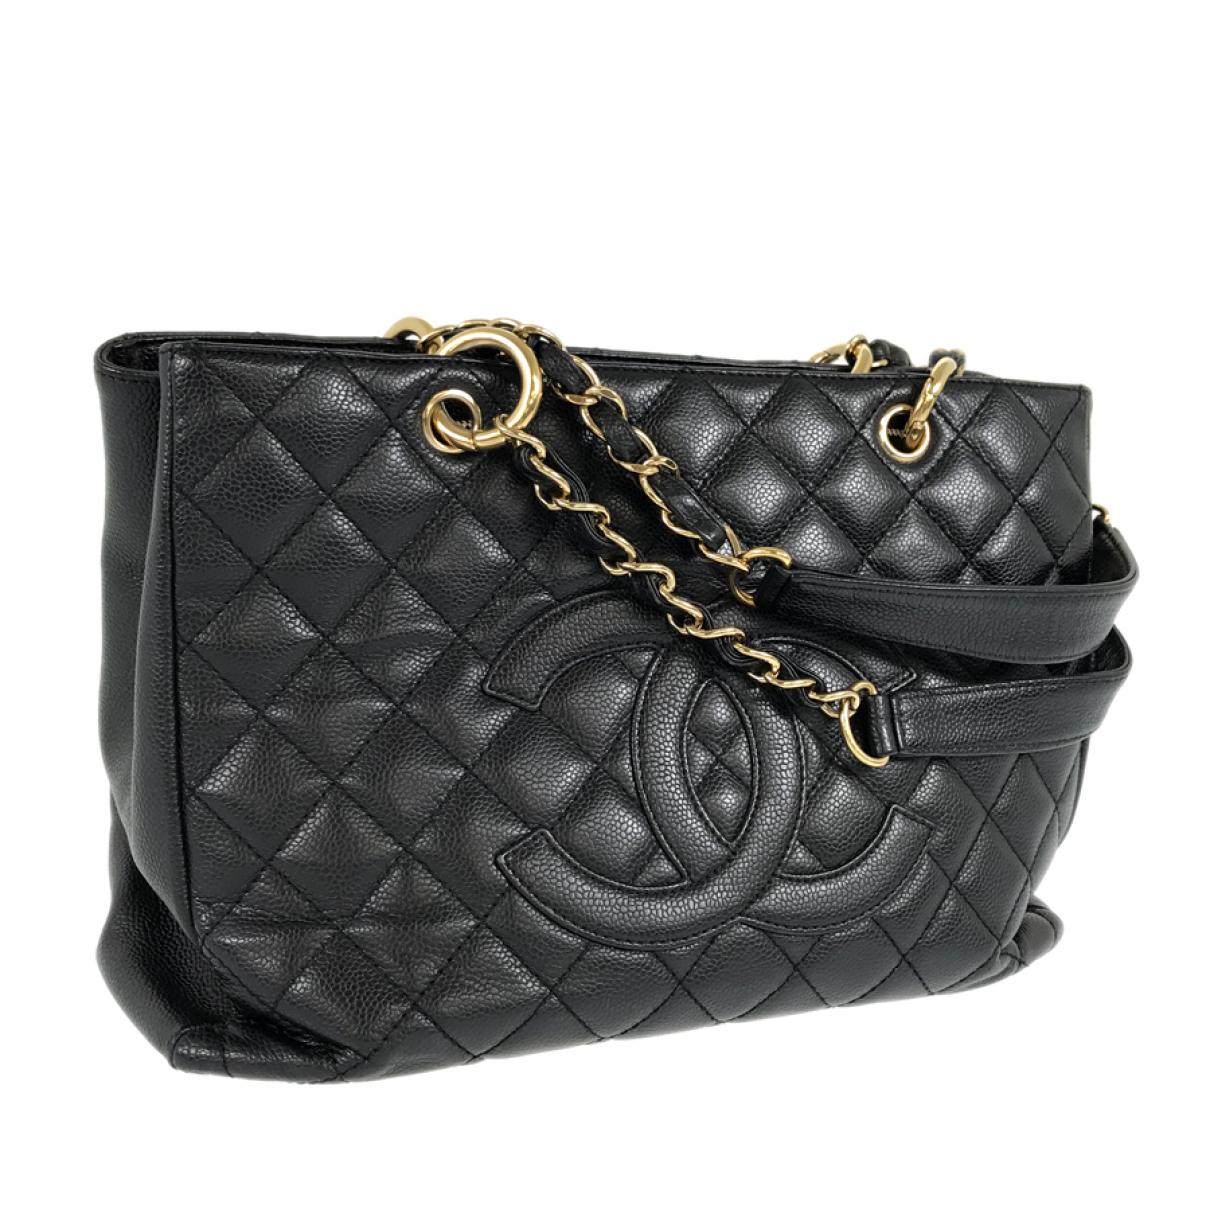 Timeless/Classique leather tote Chanel